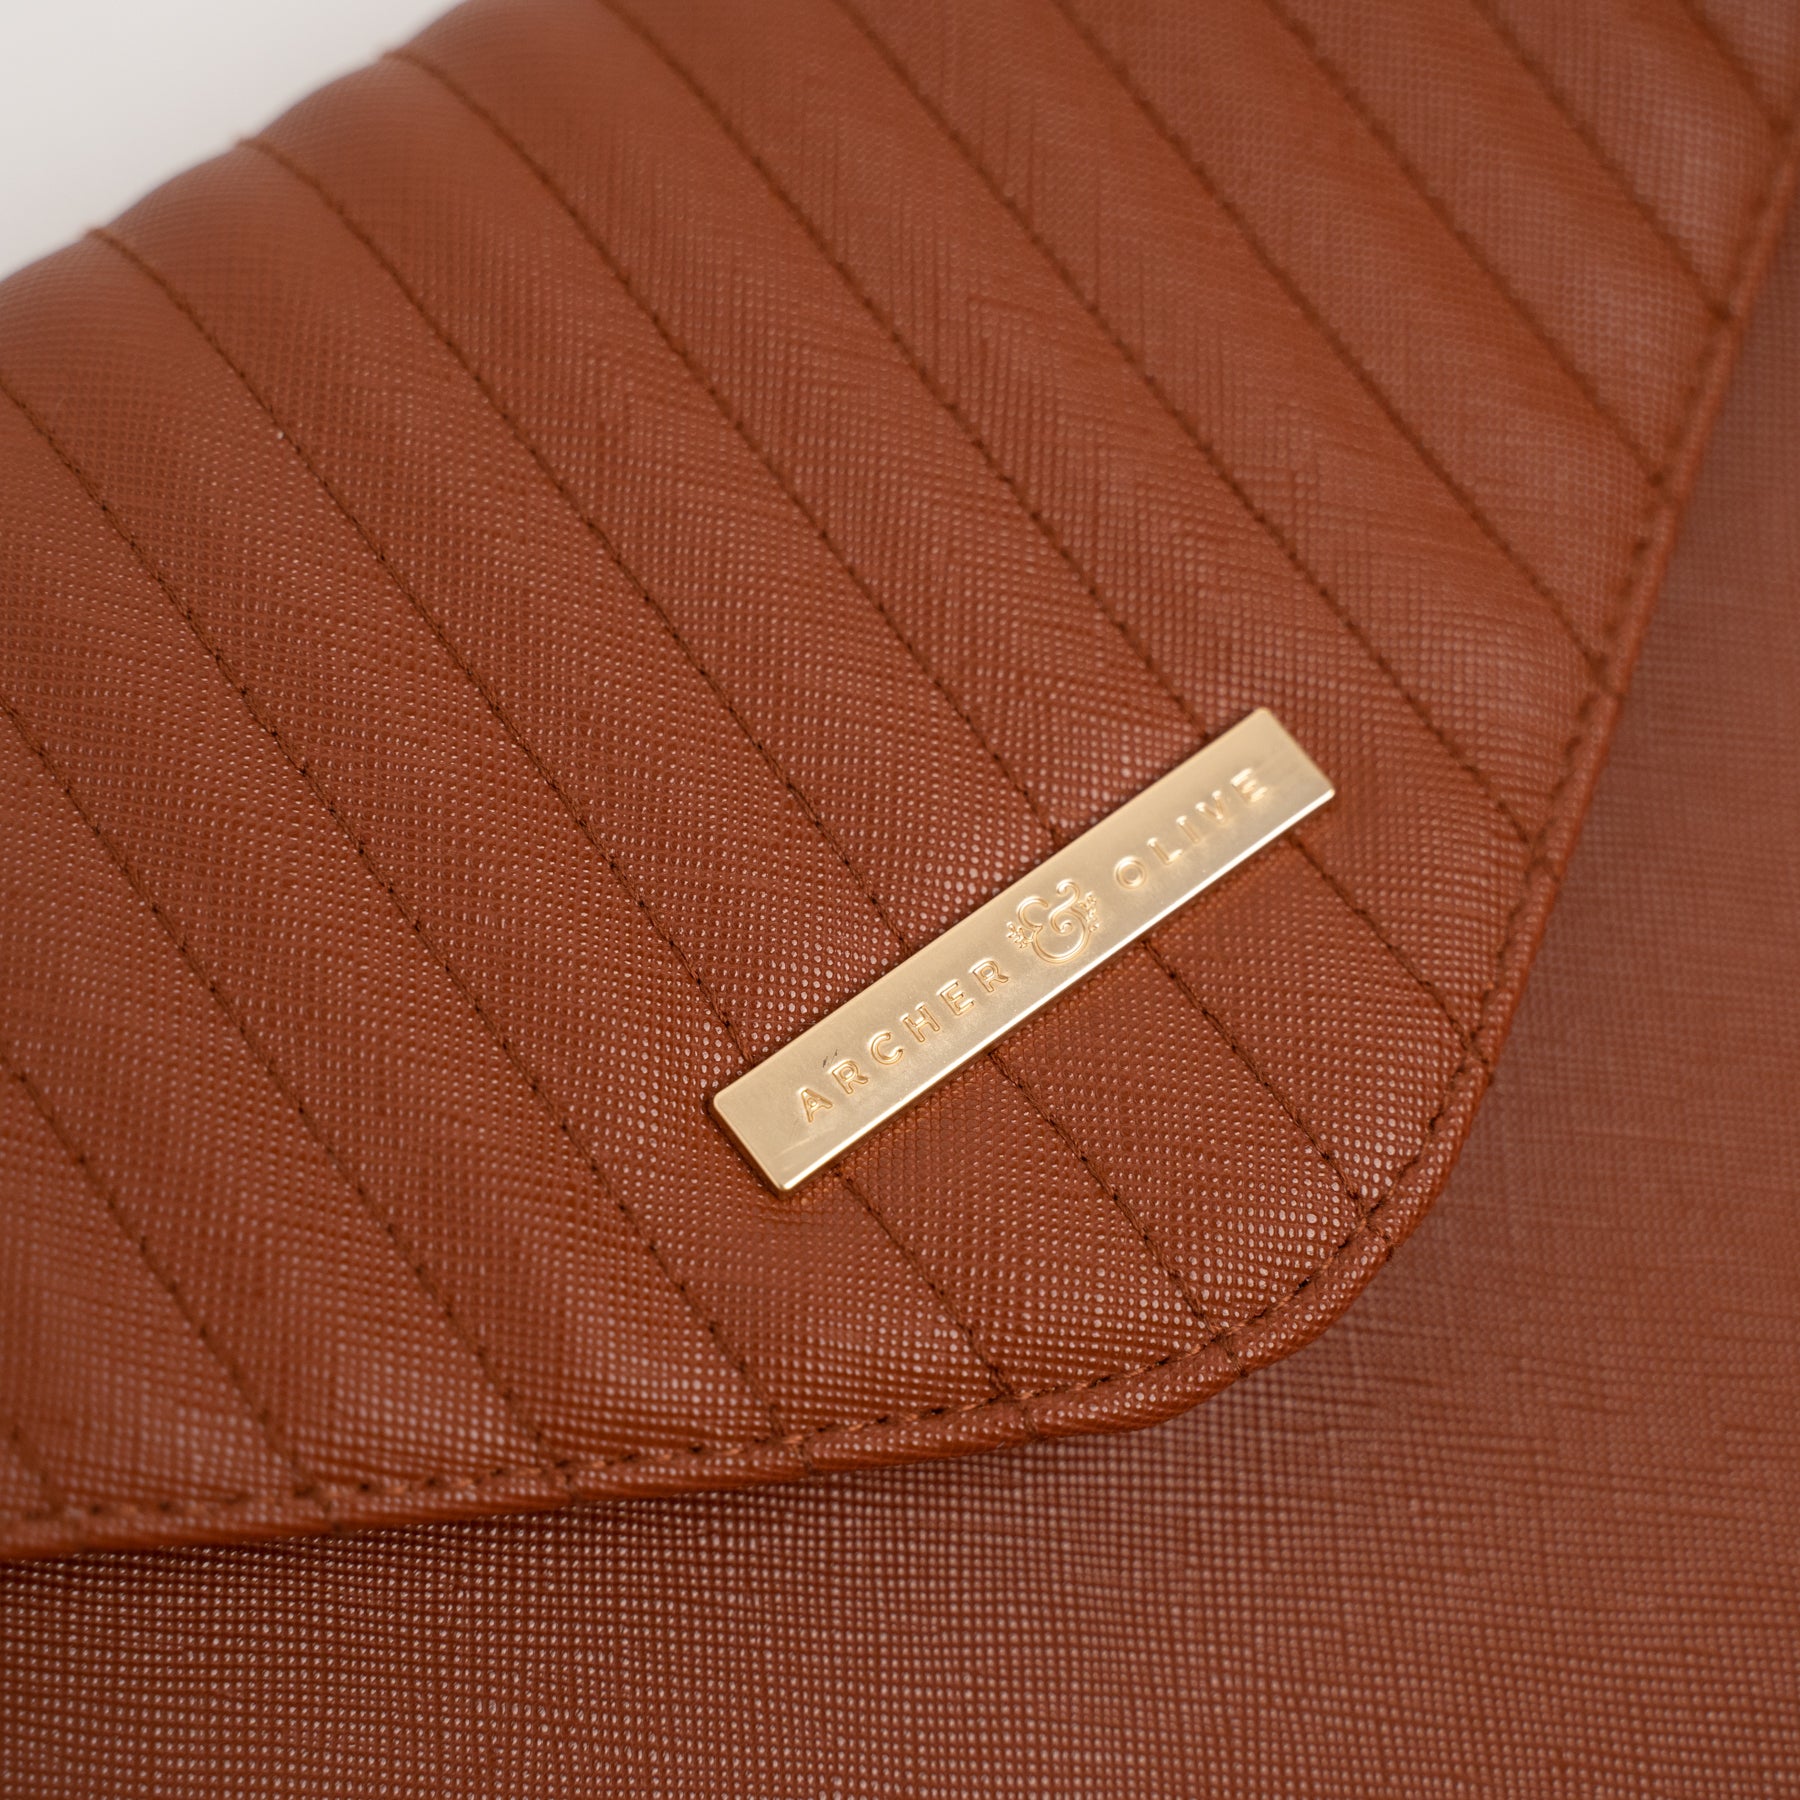 Vegan Leather Zipper Journal Bag by Archer and Olive